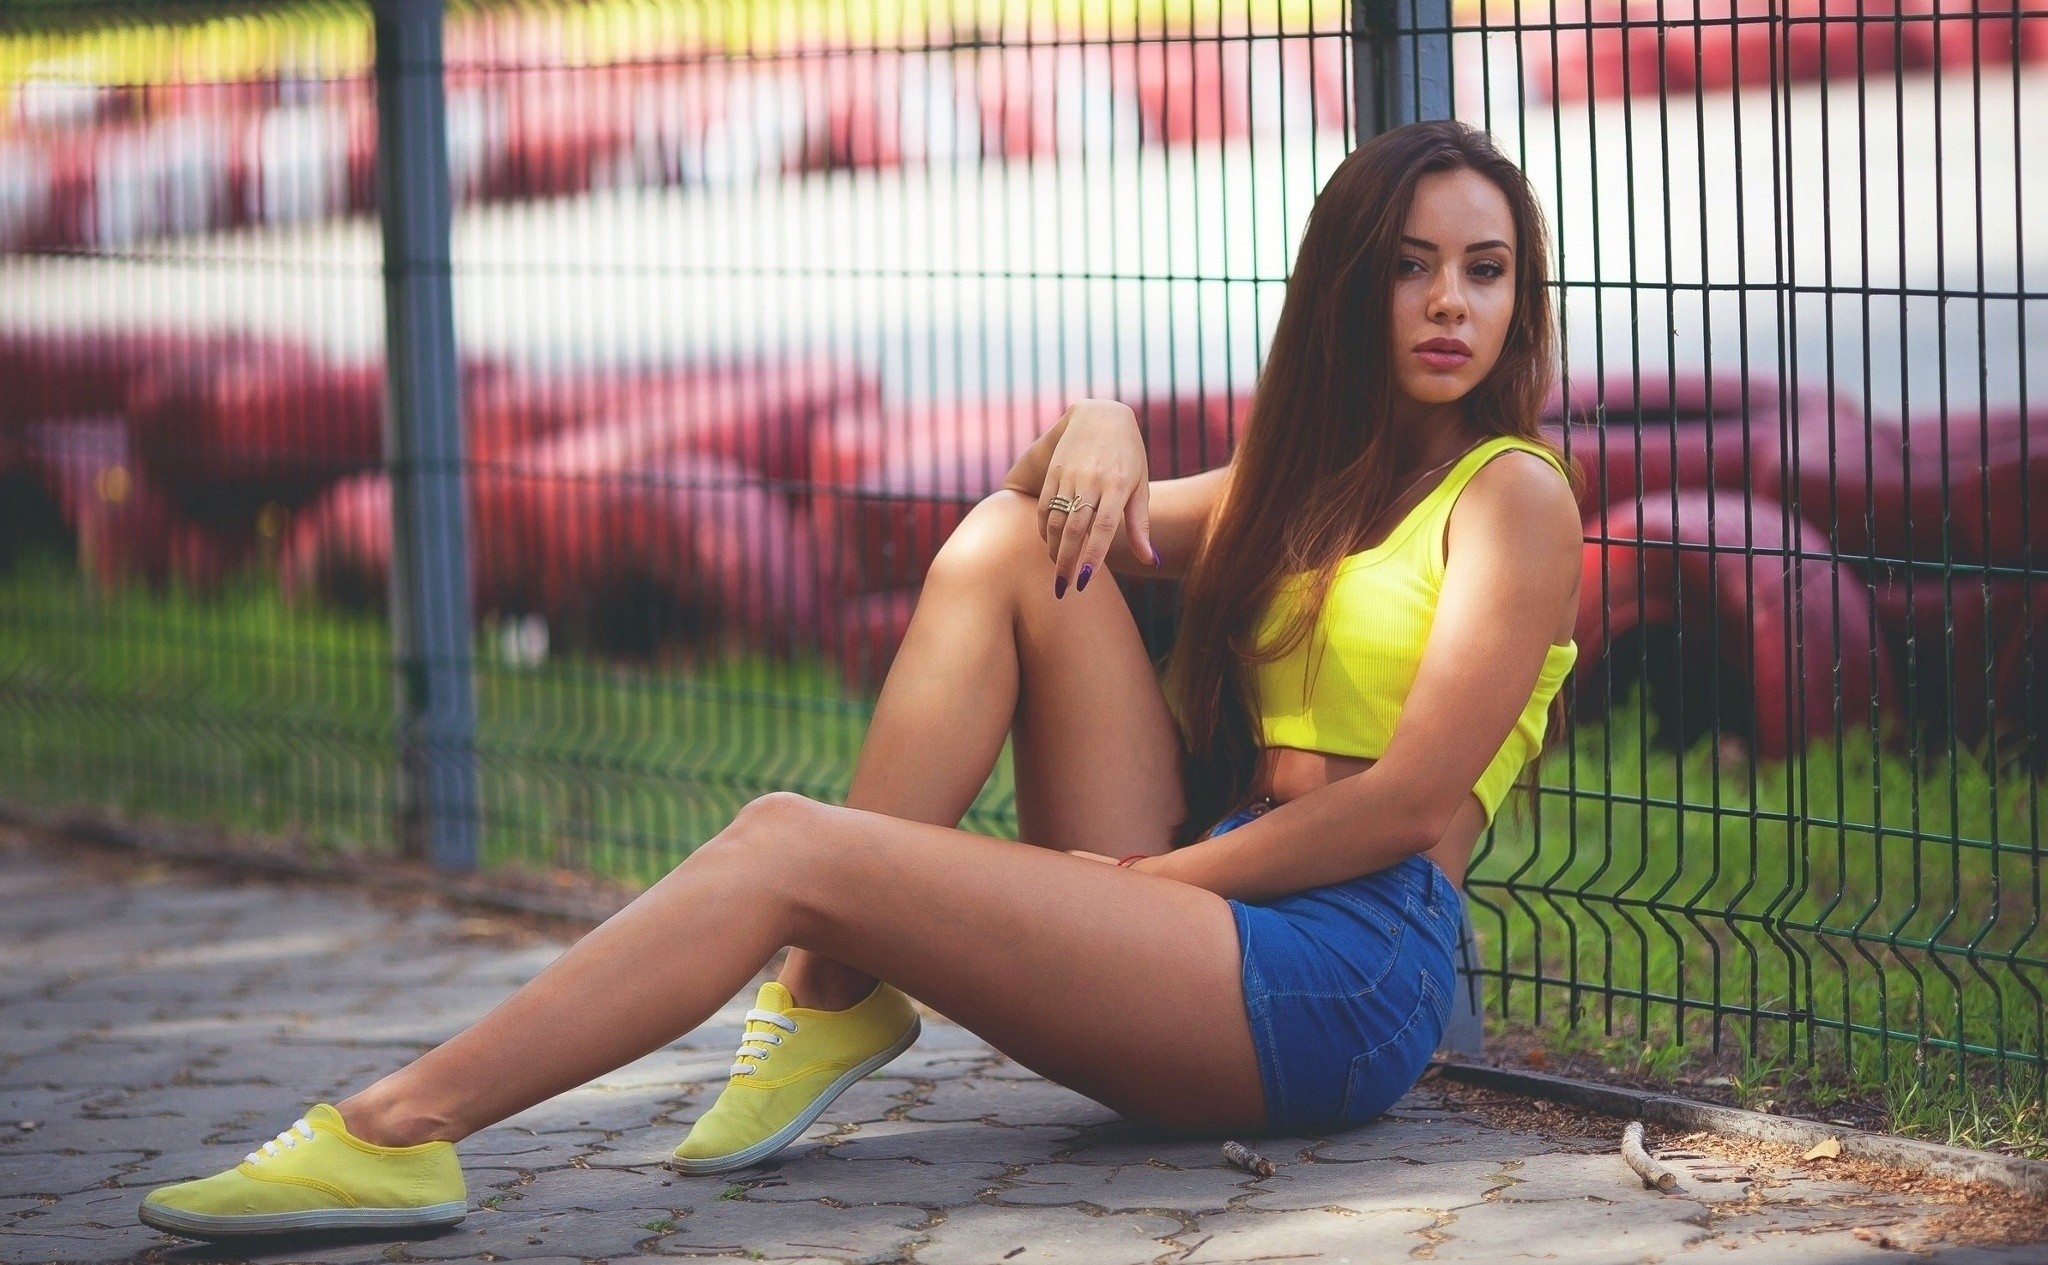 People 2048x1265 women sitting jean shorts sneakers looking at viewer brunette women outdoors urban painted nails Yellow Shoes fence model long hair